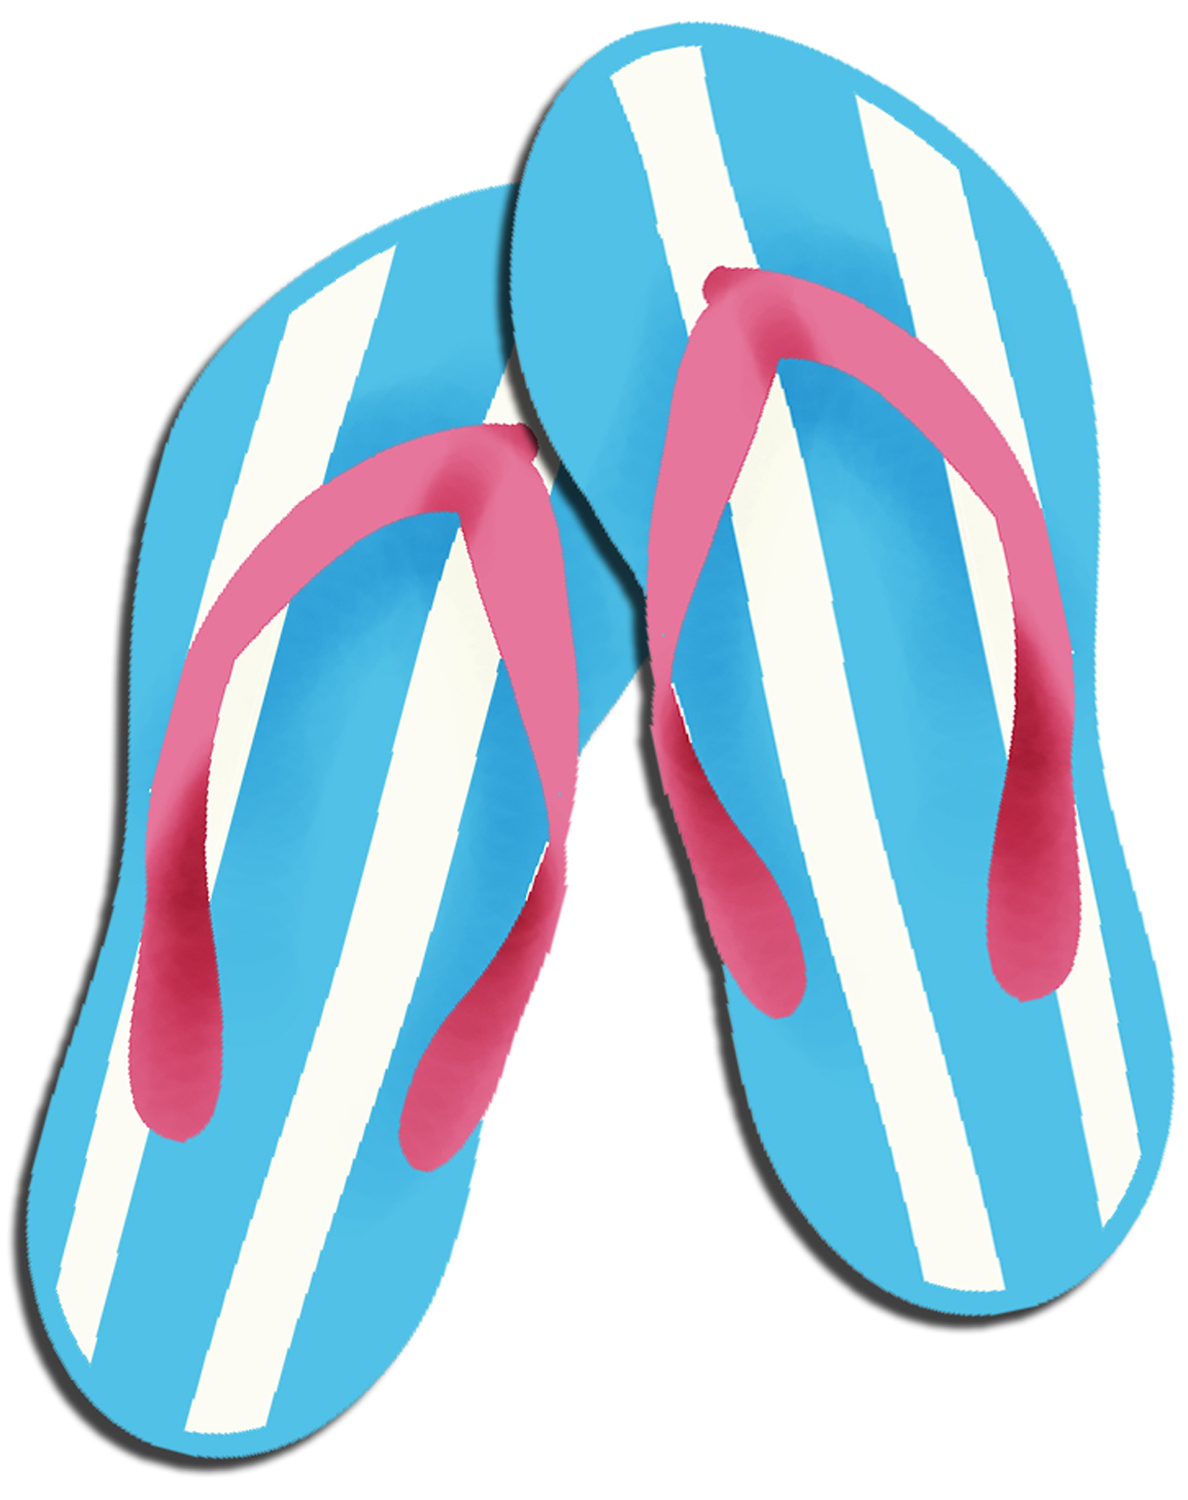 Flip Flops Clip Art & Flip Flops Clip Art Clip Art Images.